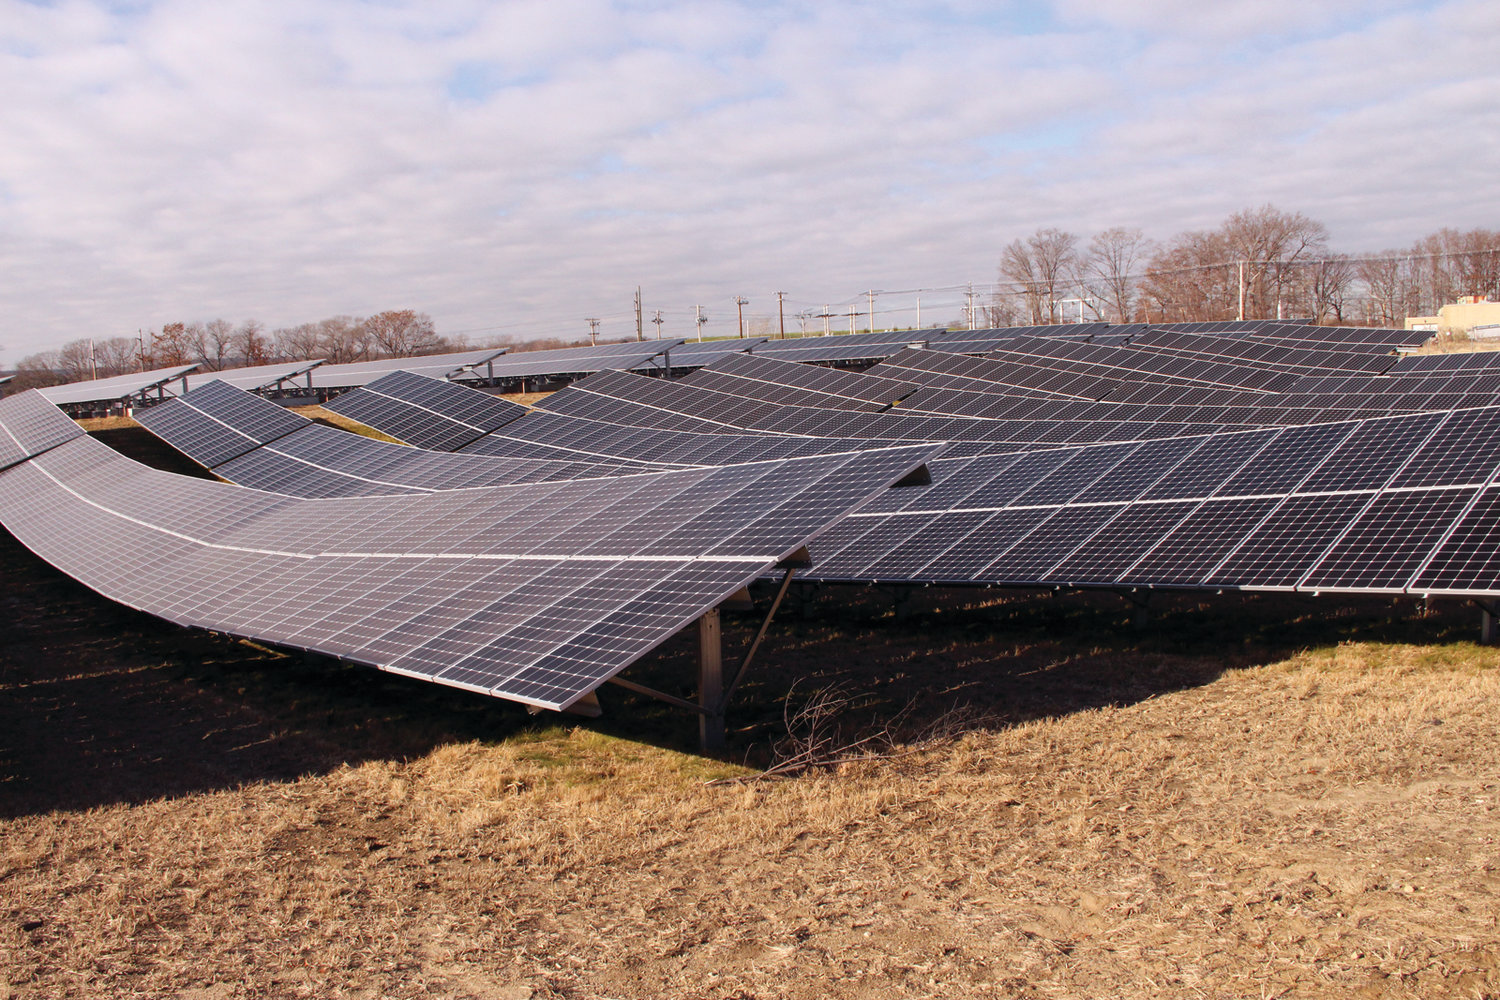 WHAT IT COULD BE: Southern Sky Renewal Energy built this solar farm on a brown field in Warwick. Some homeowners on Natick Avenue feel the company should be looking to develop similar sites in Cranston, not the wooded land under consideration.